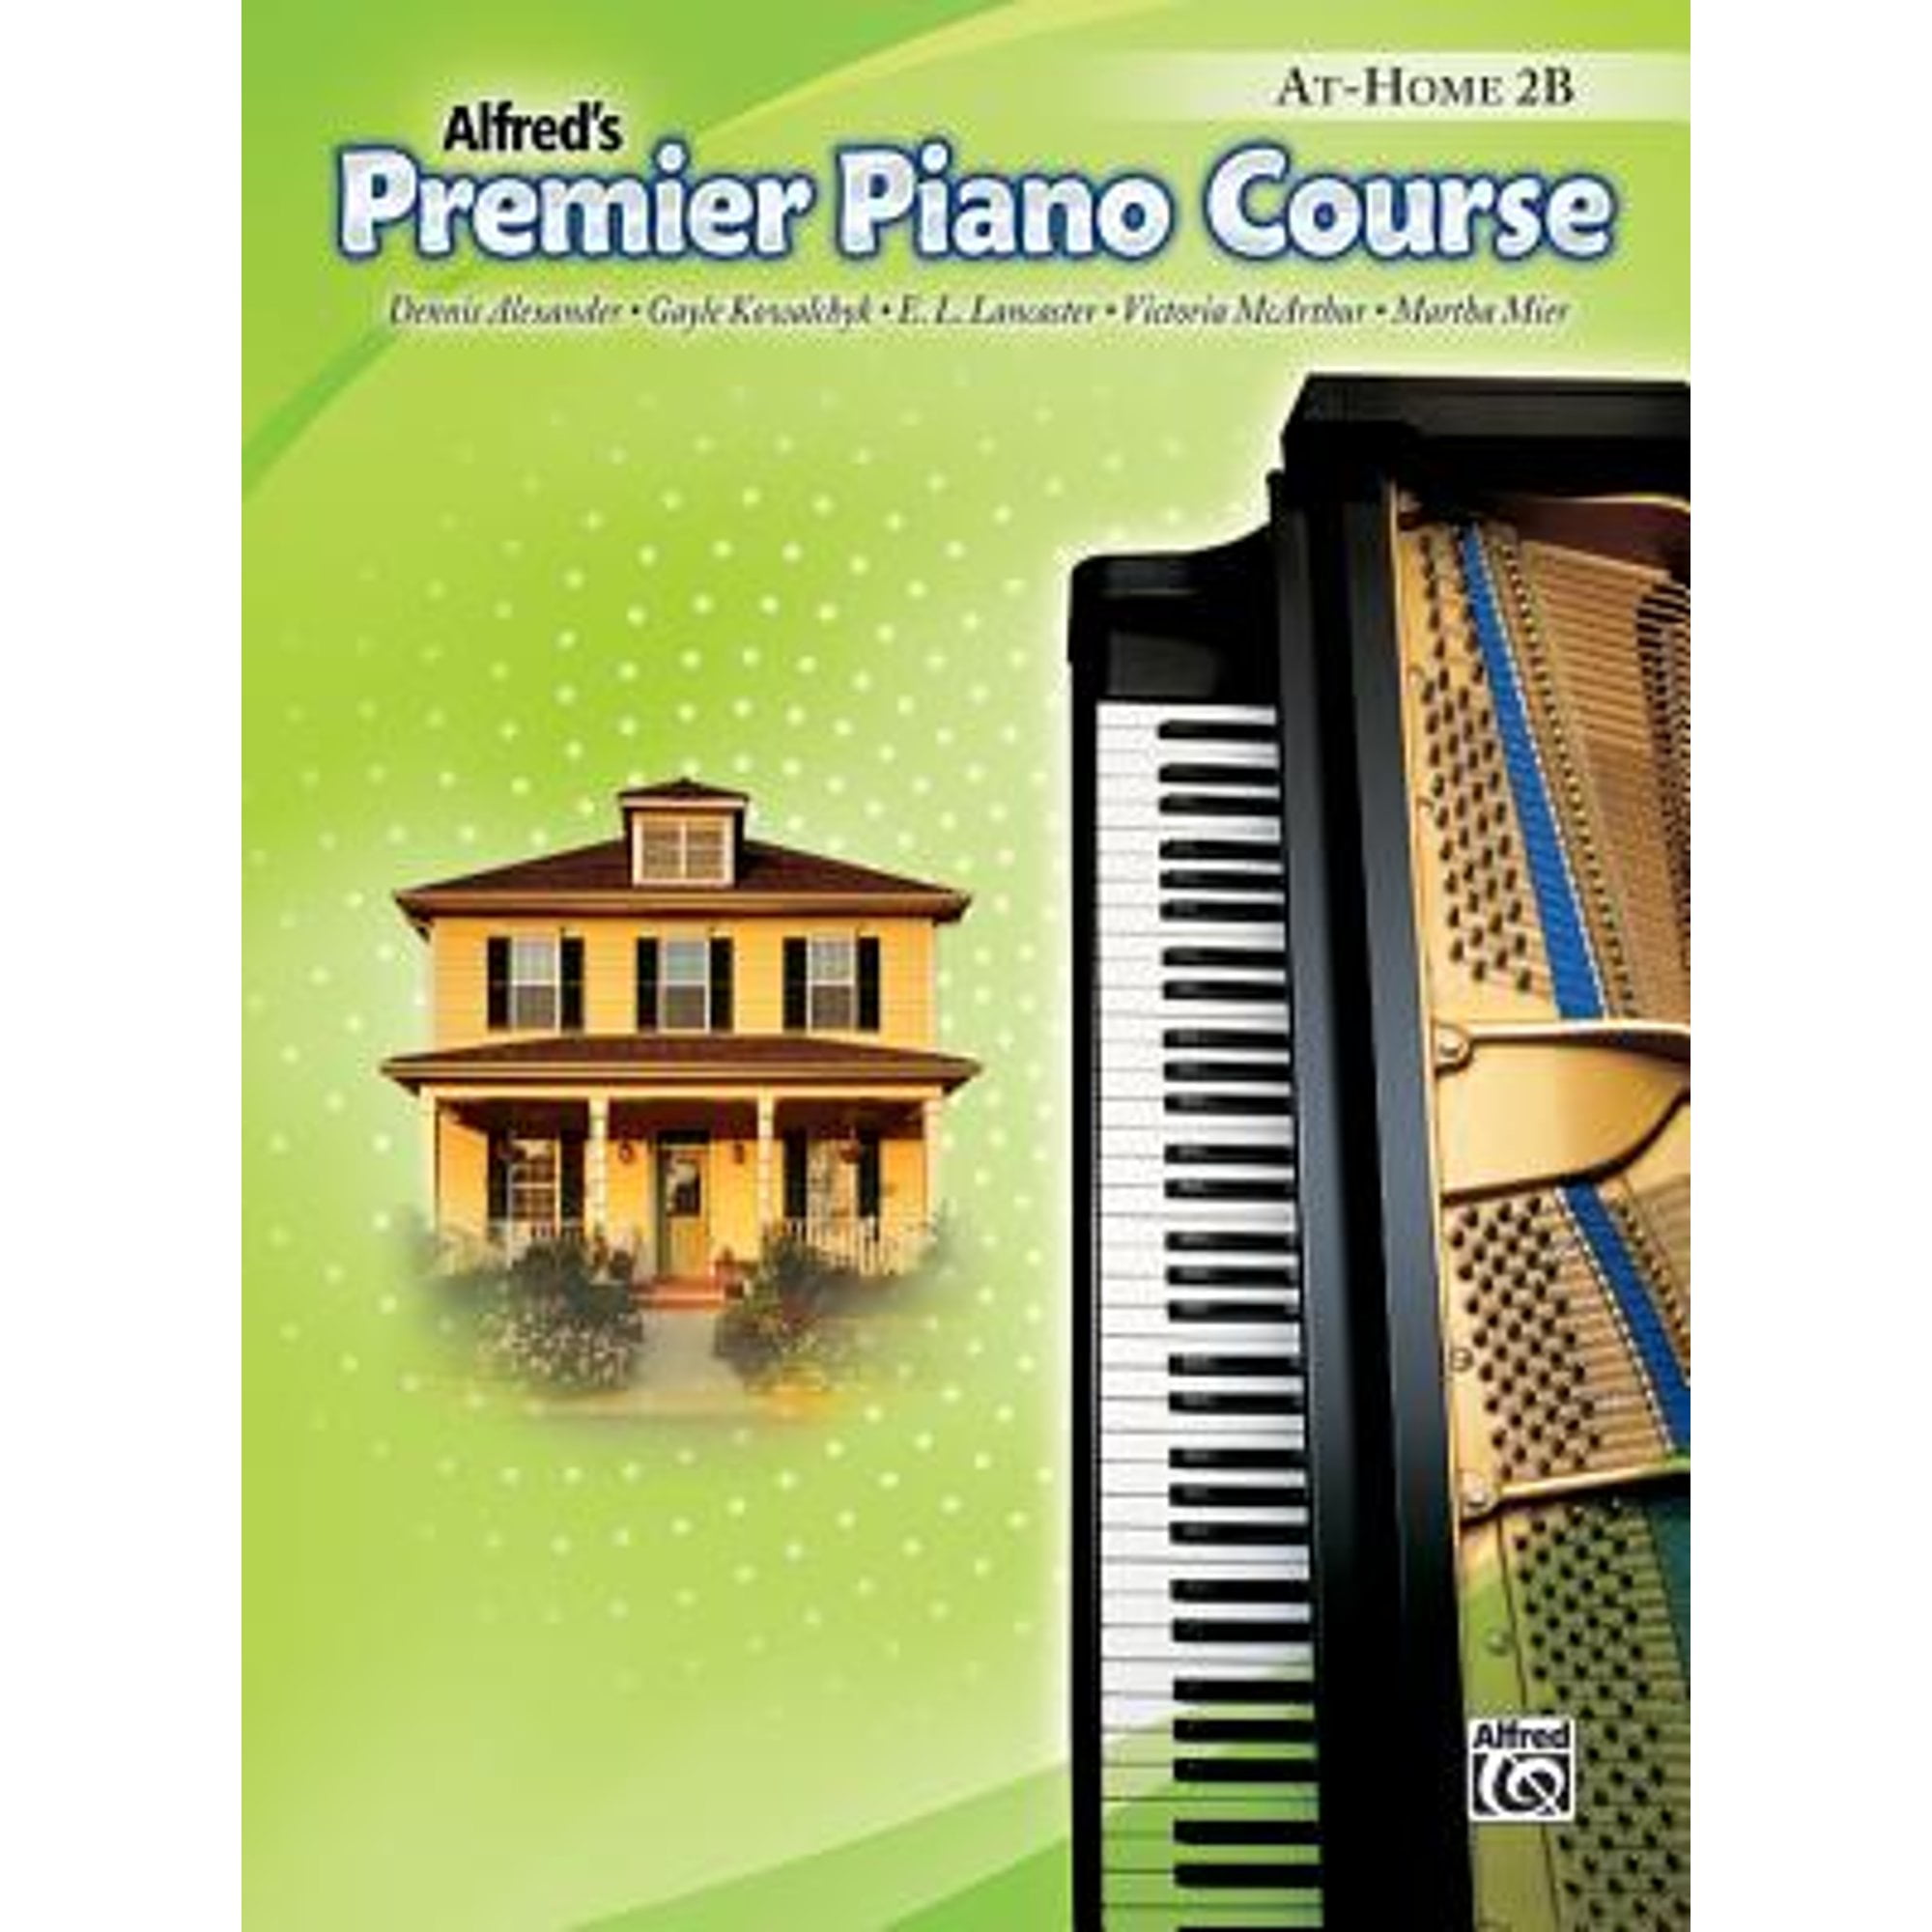 Pre-Owned Premier Piano Course At-Home Book, Bk 2b (Paperback 9780739041420) by Dennis Alexander, Gayle Kowalchyk, E L Lancaster